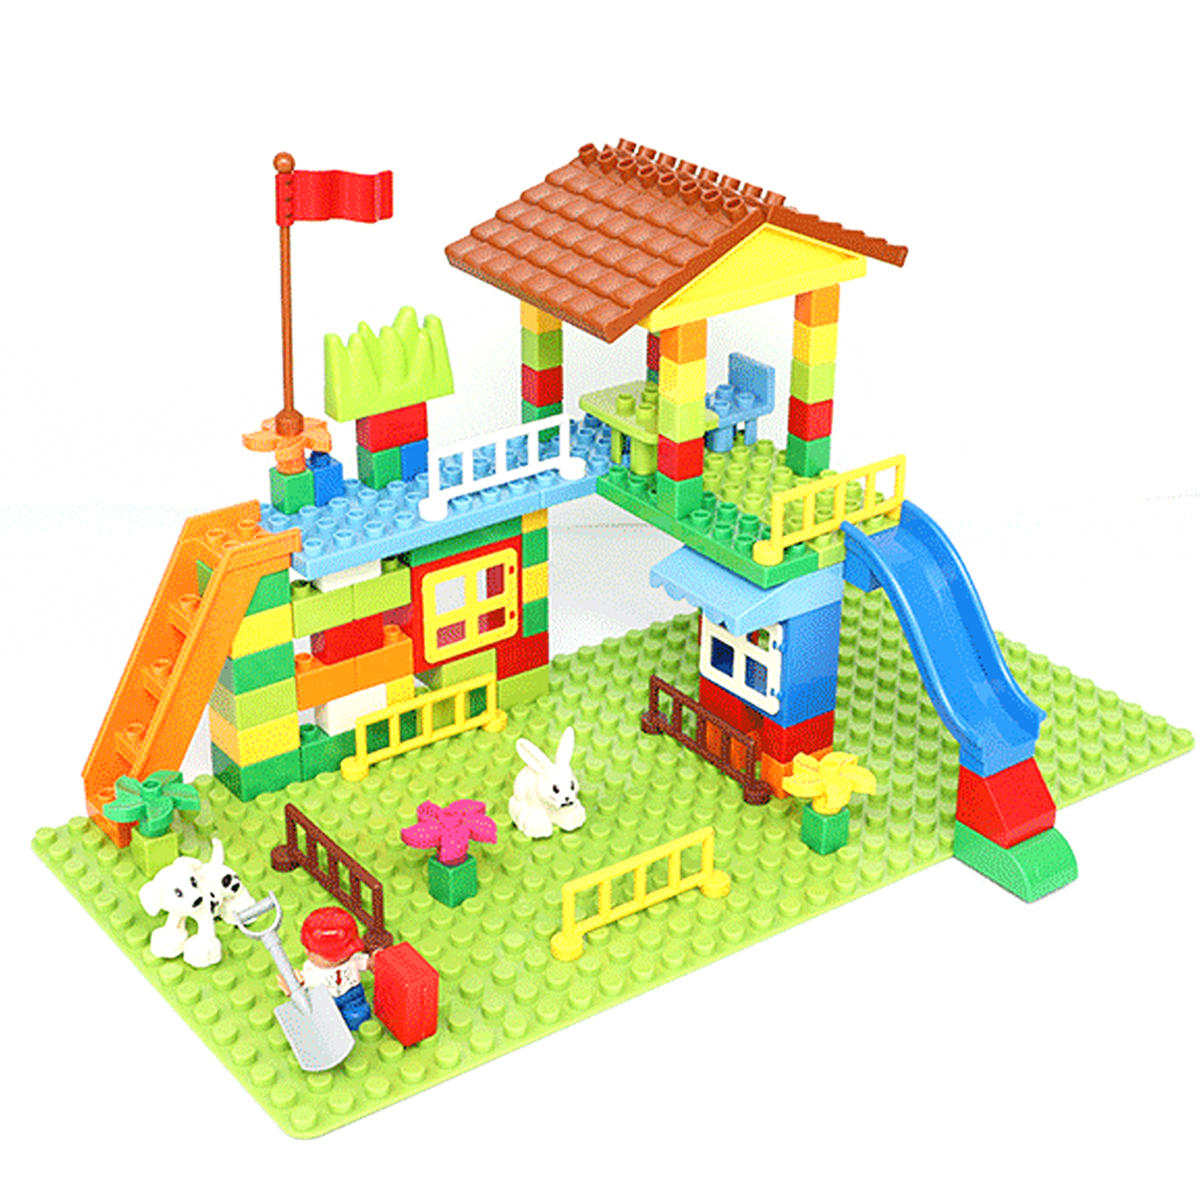 creative building toys for kids